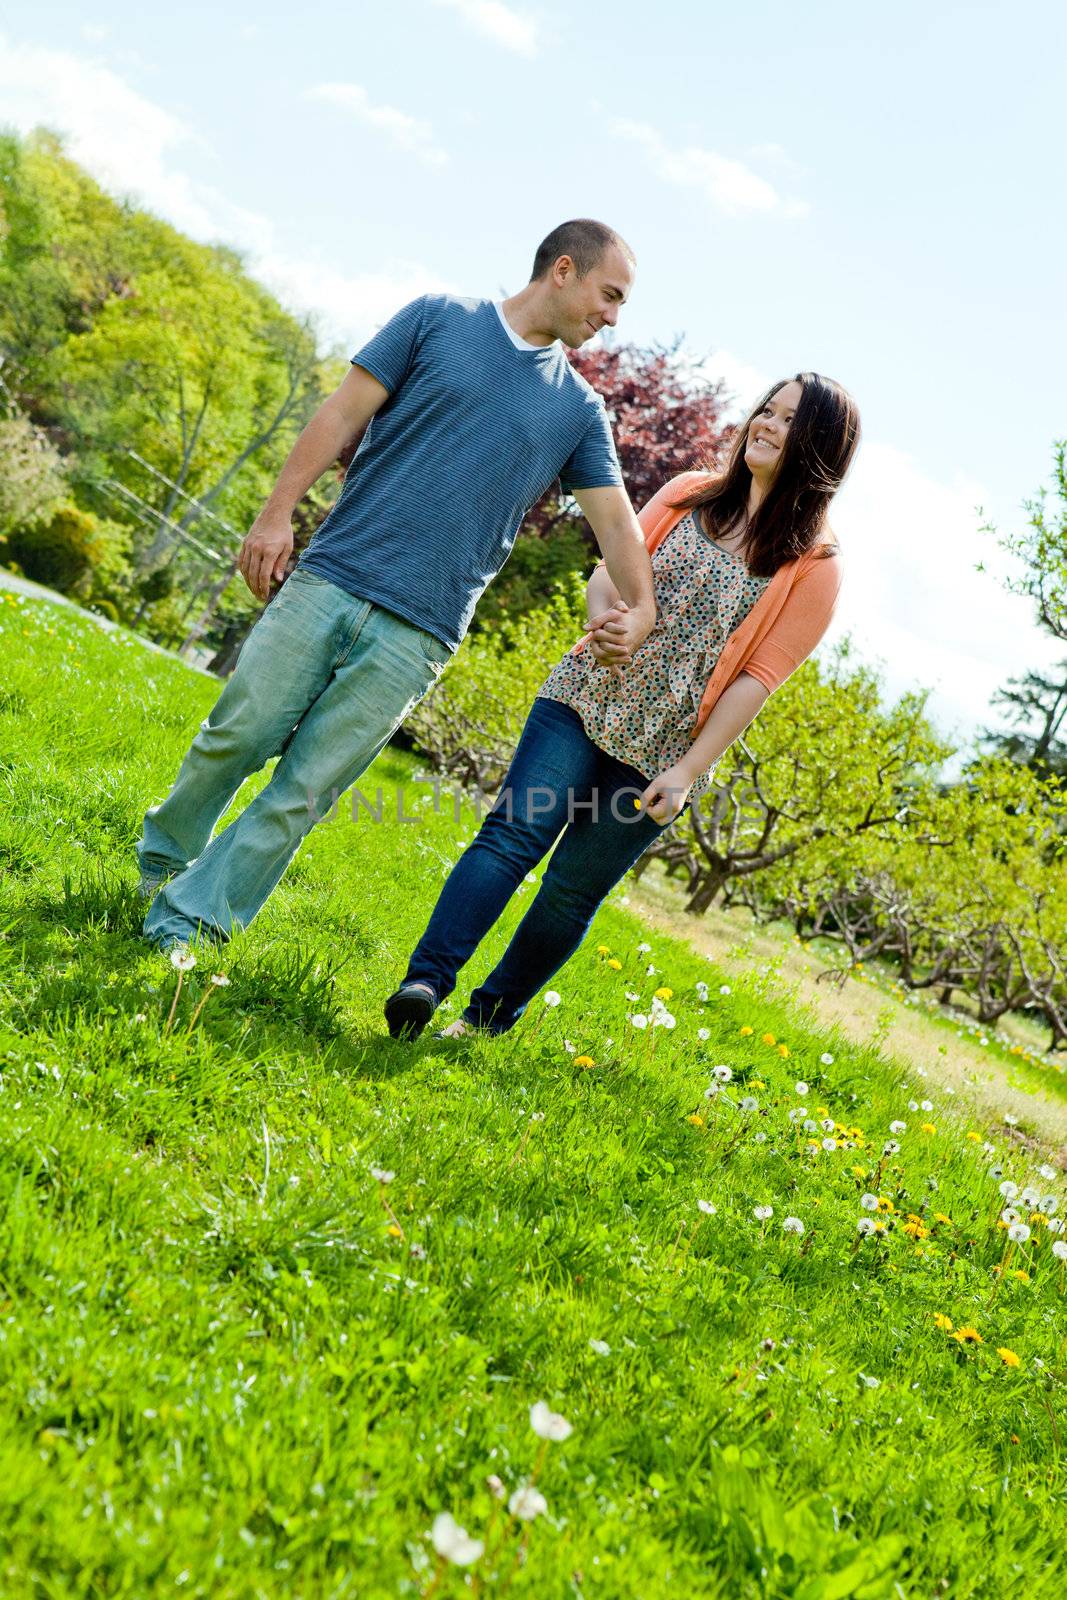 Young happy couple enjoying each others company outdoors through a country field.